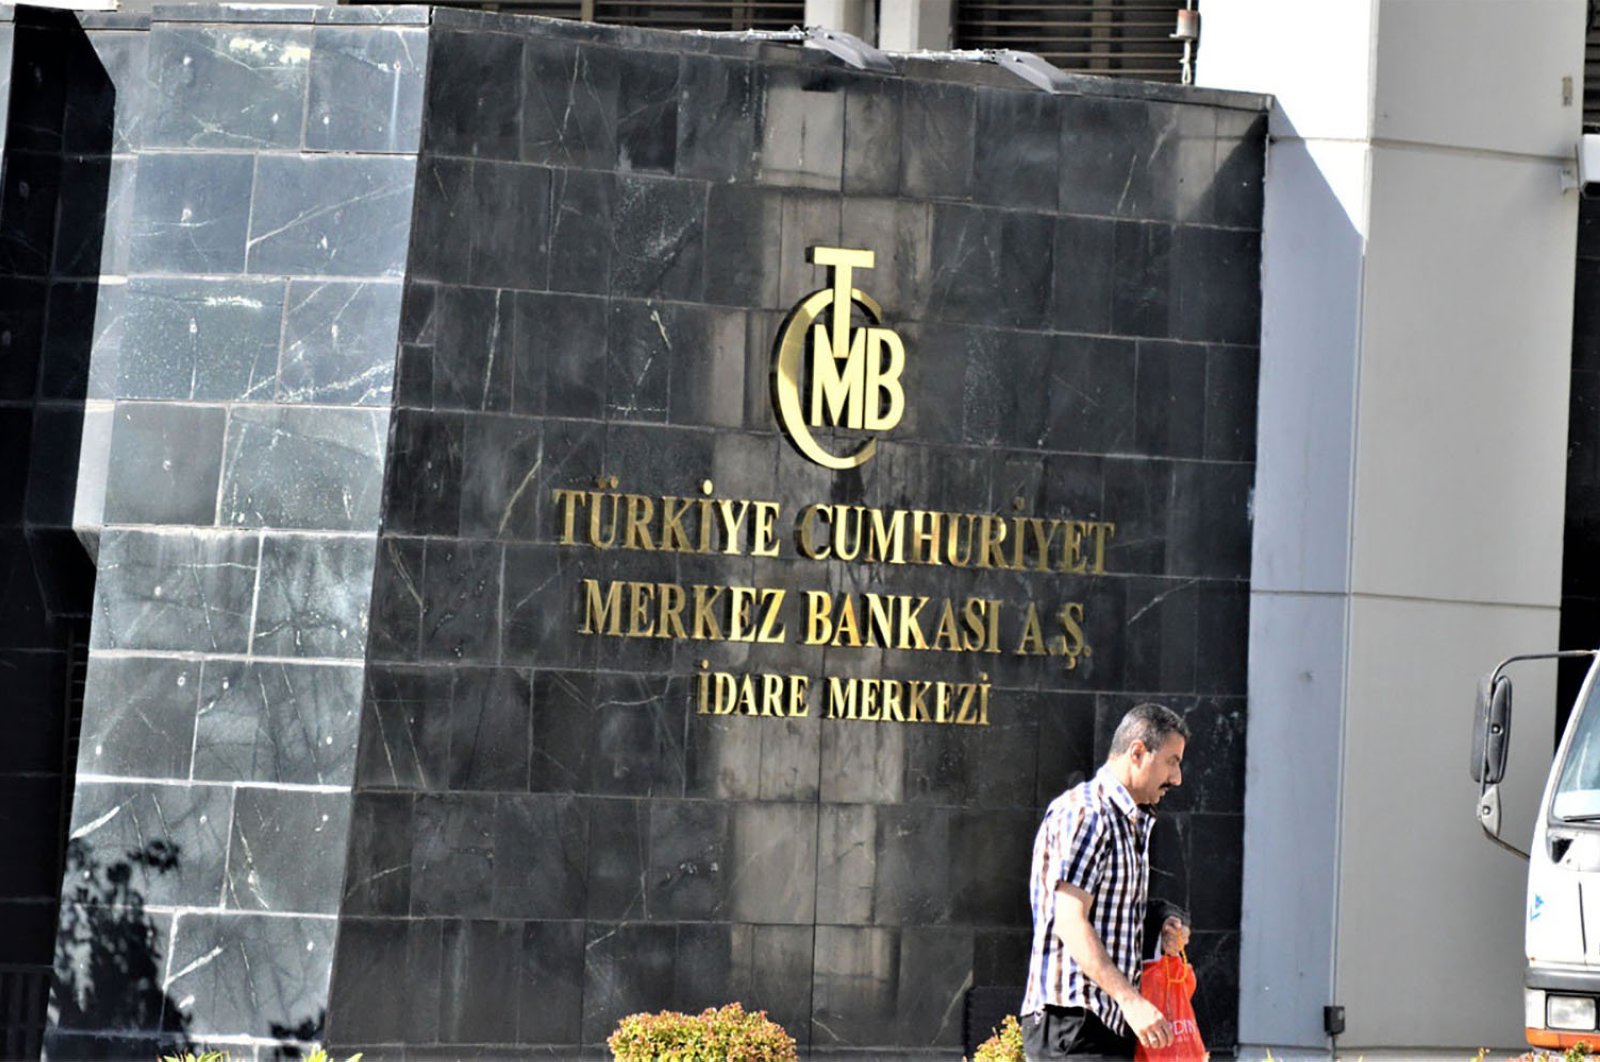 The Central Bank of the Republic of Turkey's headquarters is seen in Ankara, Turkey. (File Photo)